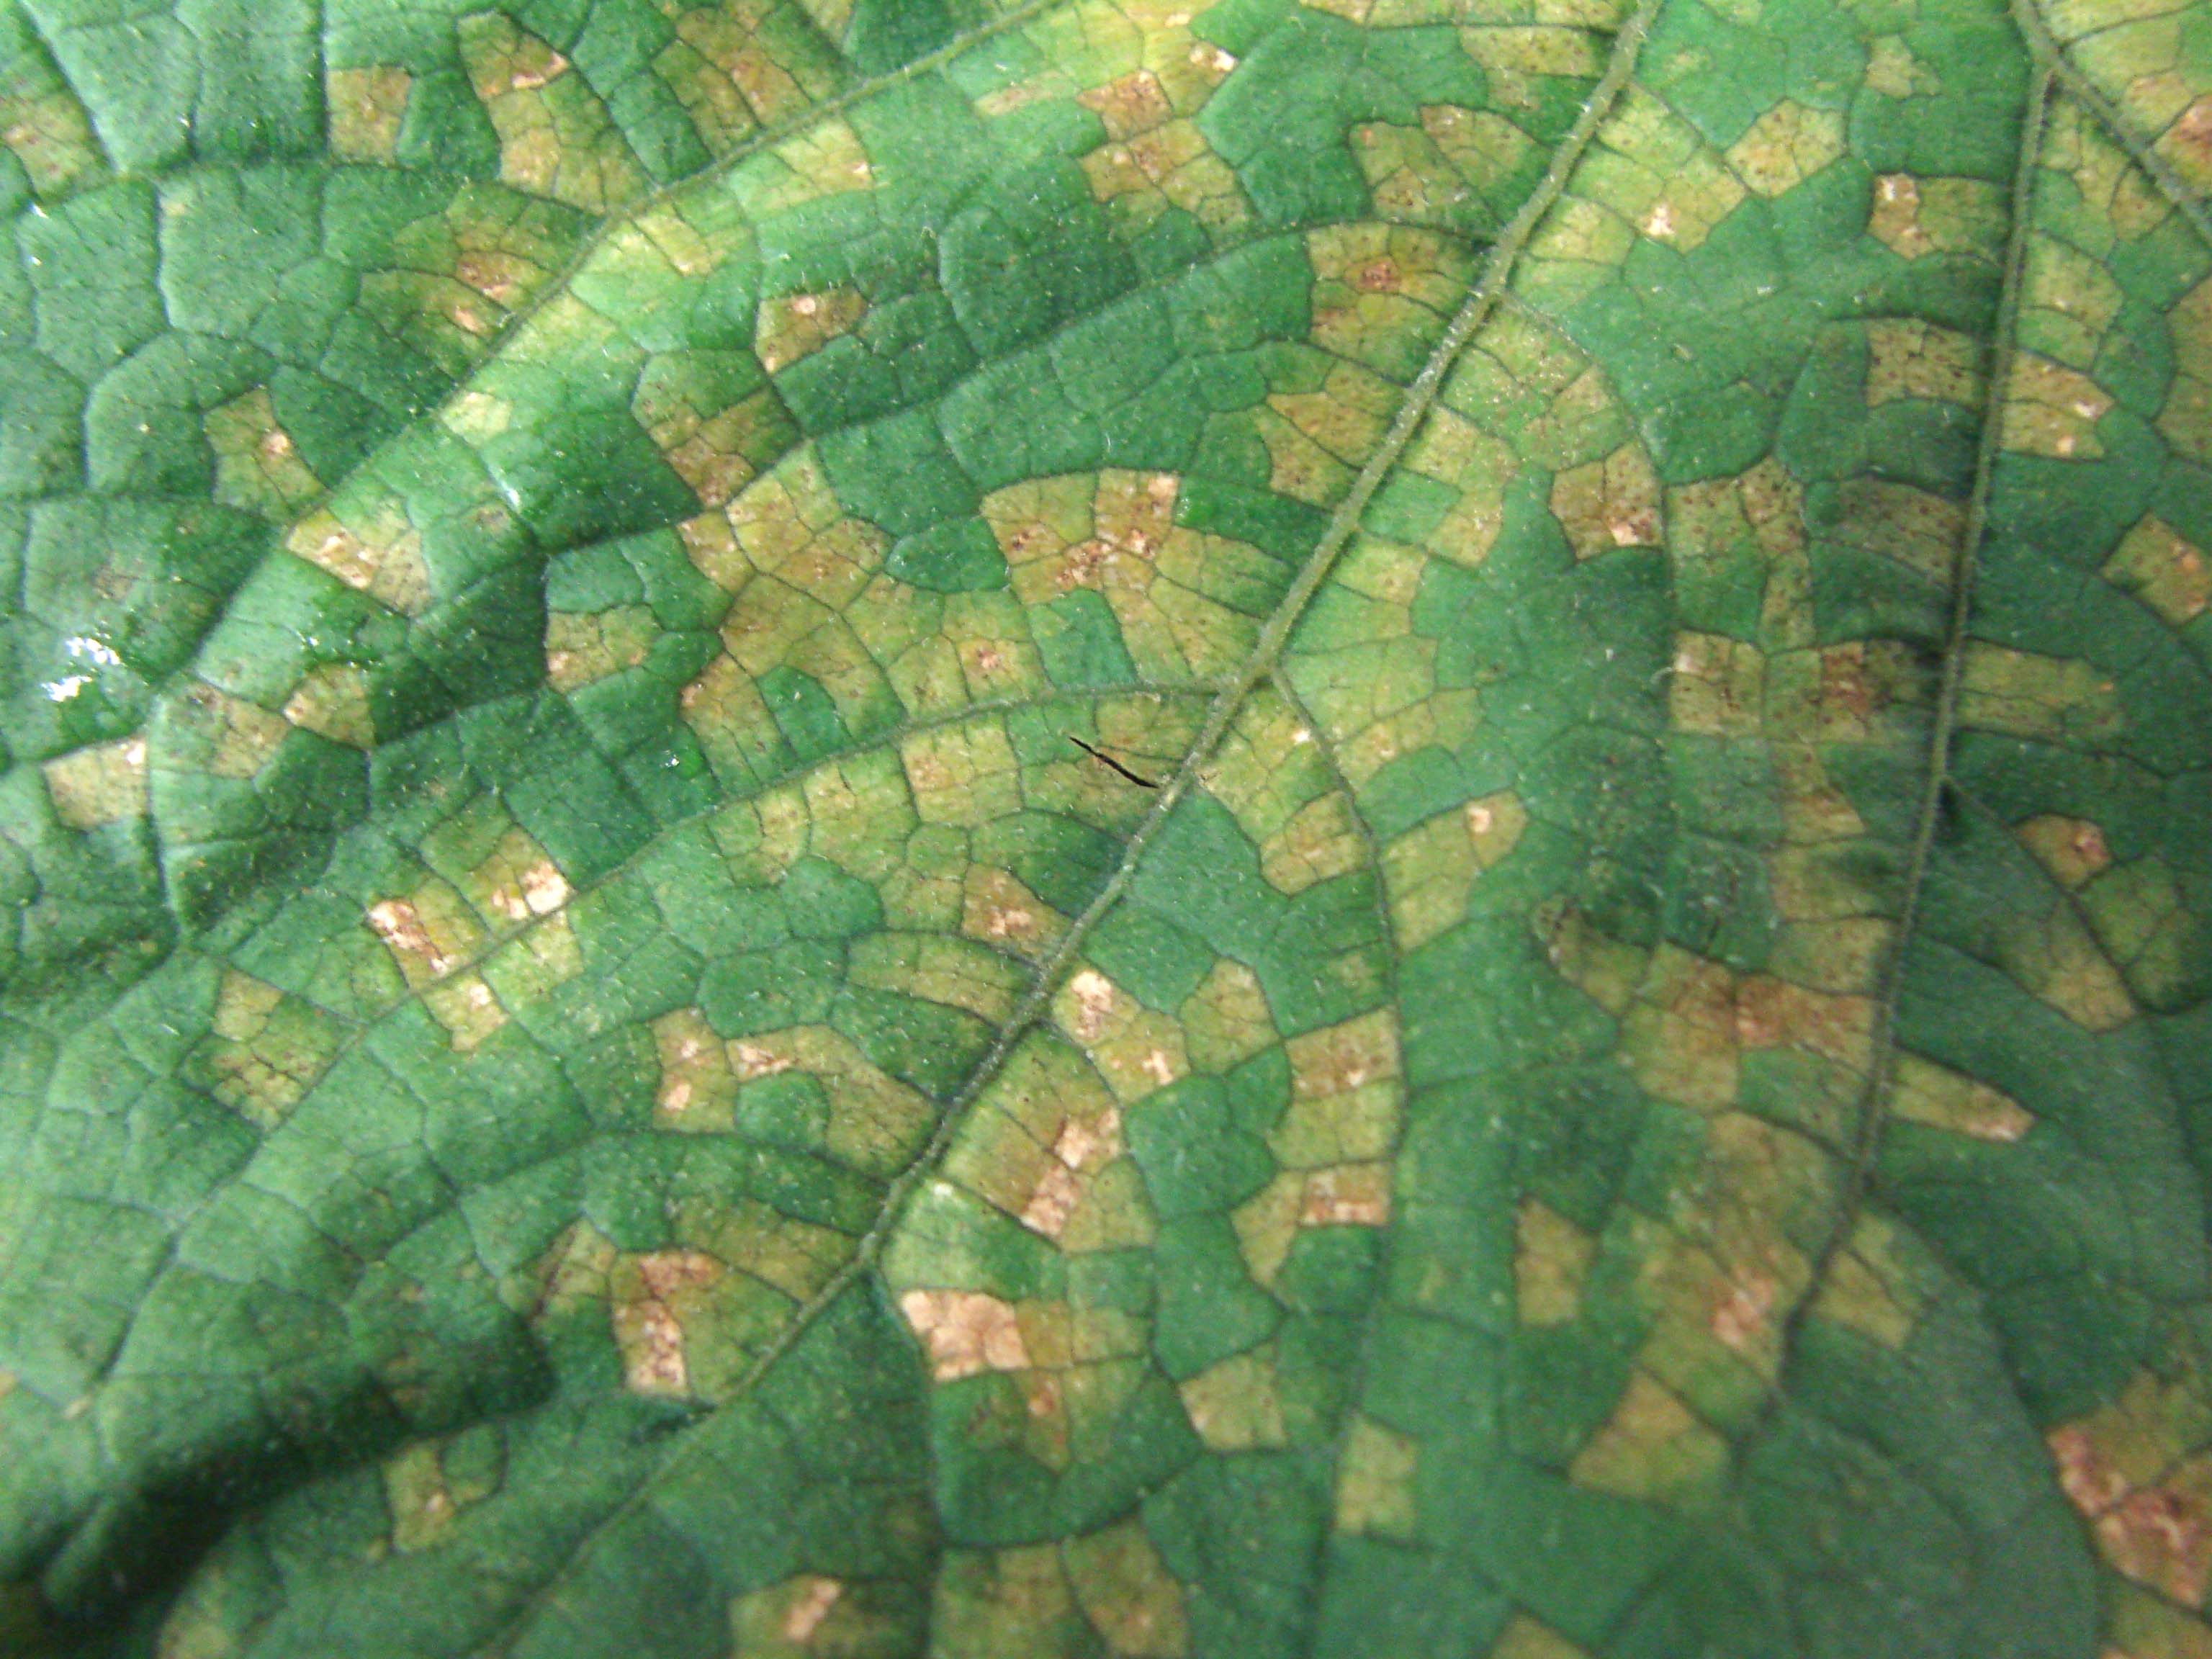 Close-up of cucumber downy mildew on a leaf